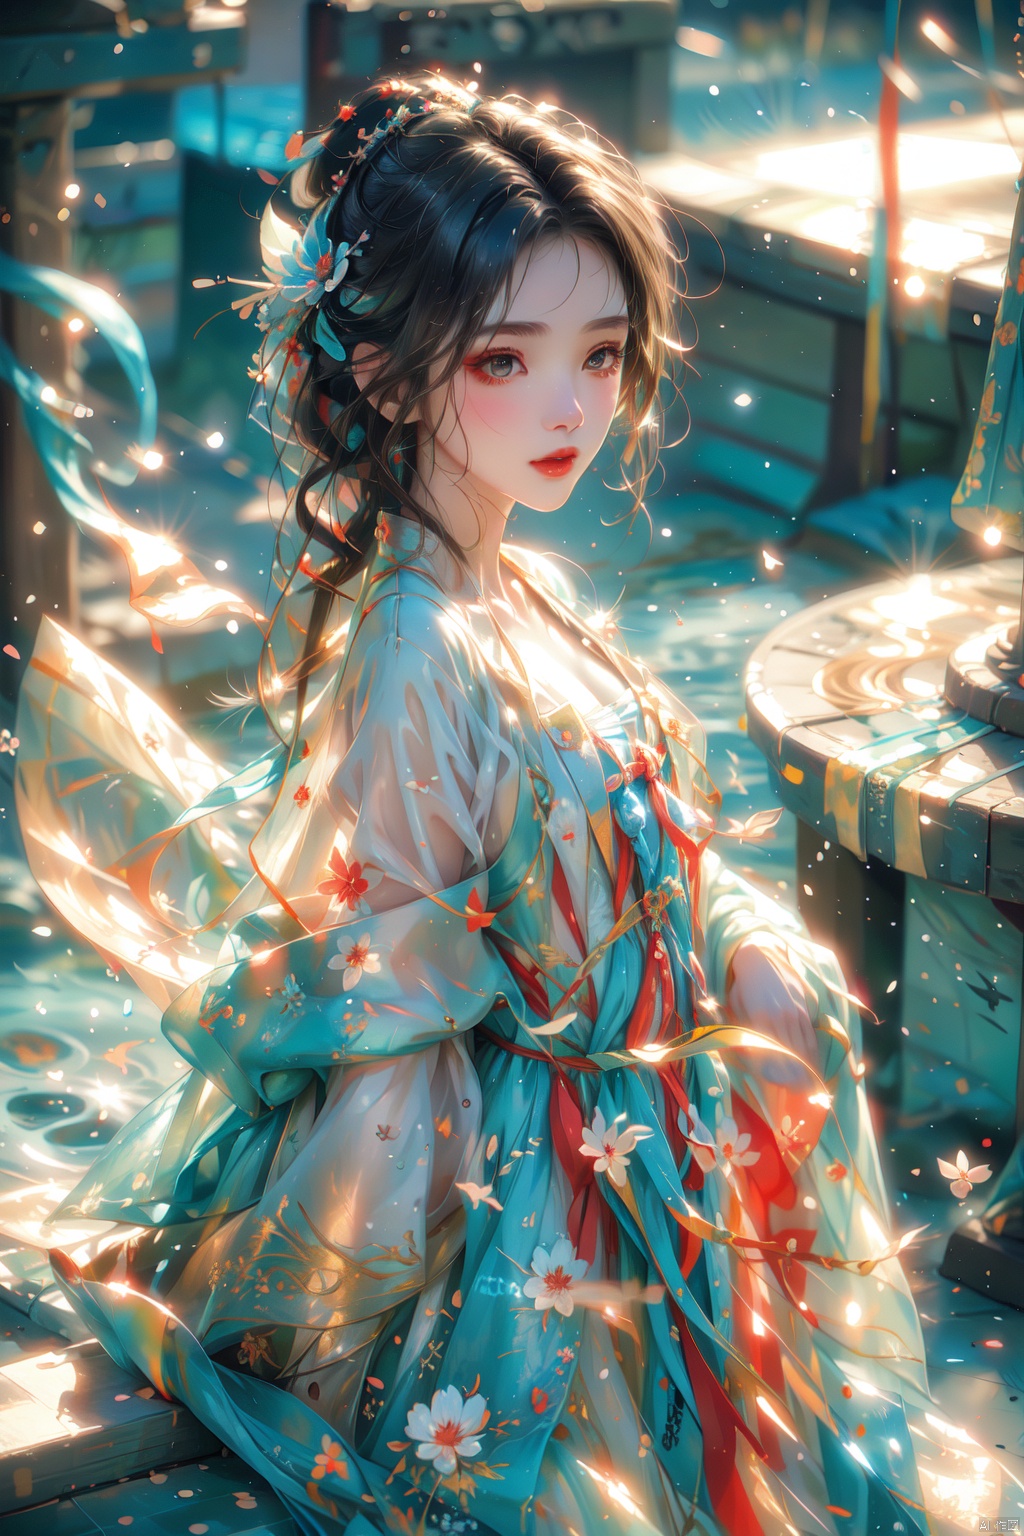  blue butterfly, in a colorful fantasy realism style, realistic color palette, wink and you miss details, japanese style art, fluid and organic shapes, light teal and light red, light reflection, 1 girl